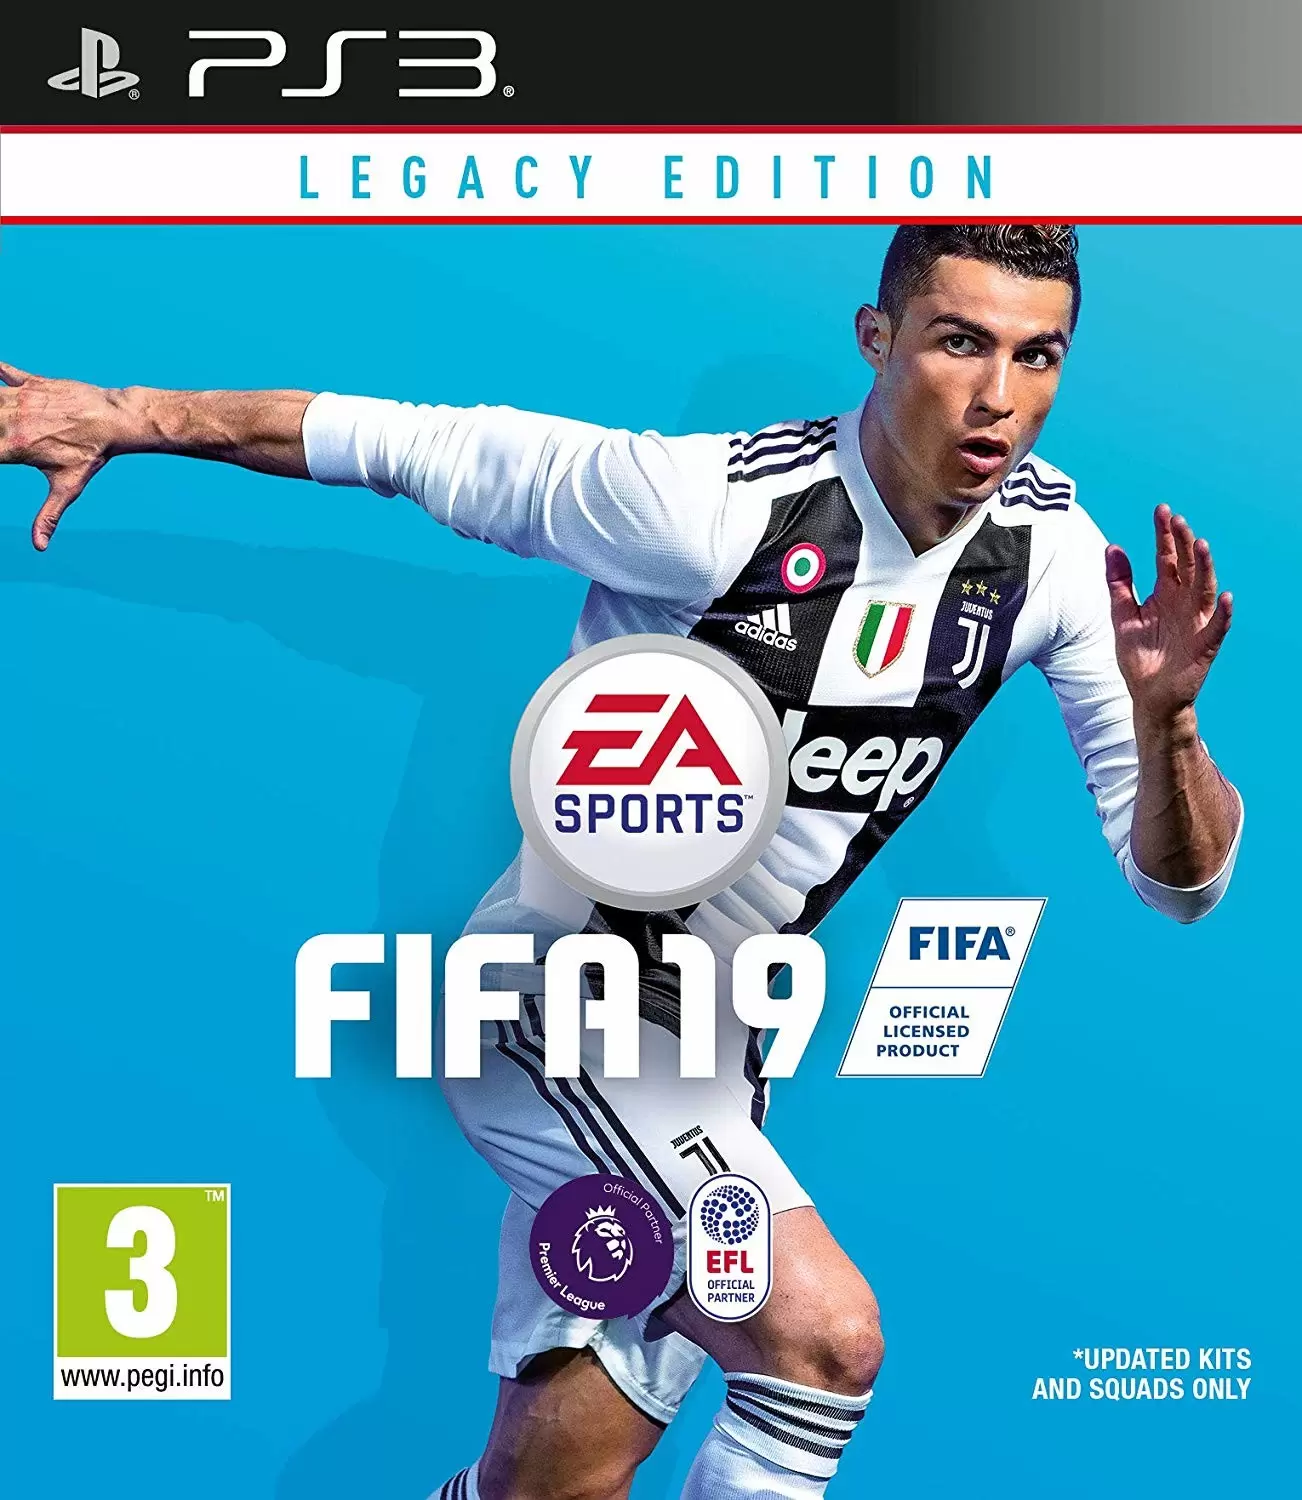 PS3 Games - FIFA 19 Legacy Edition